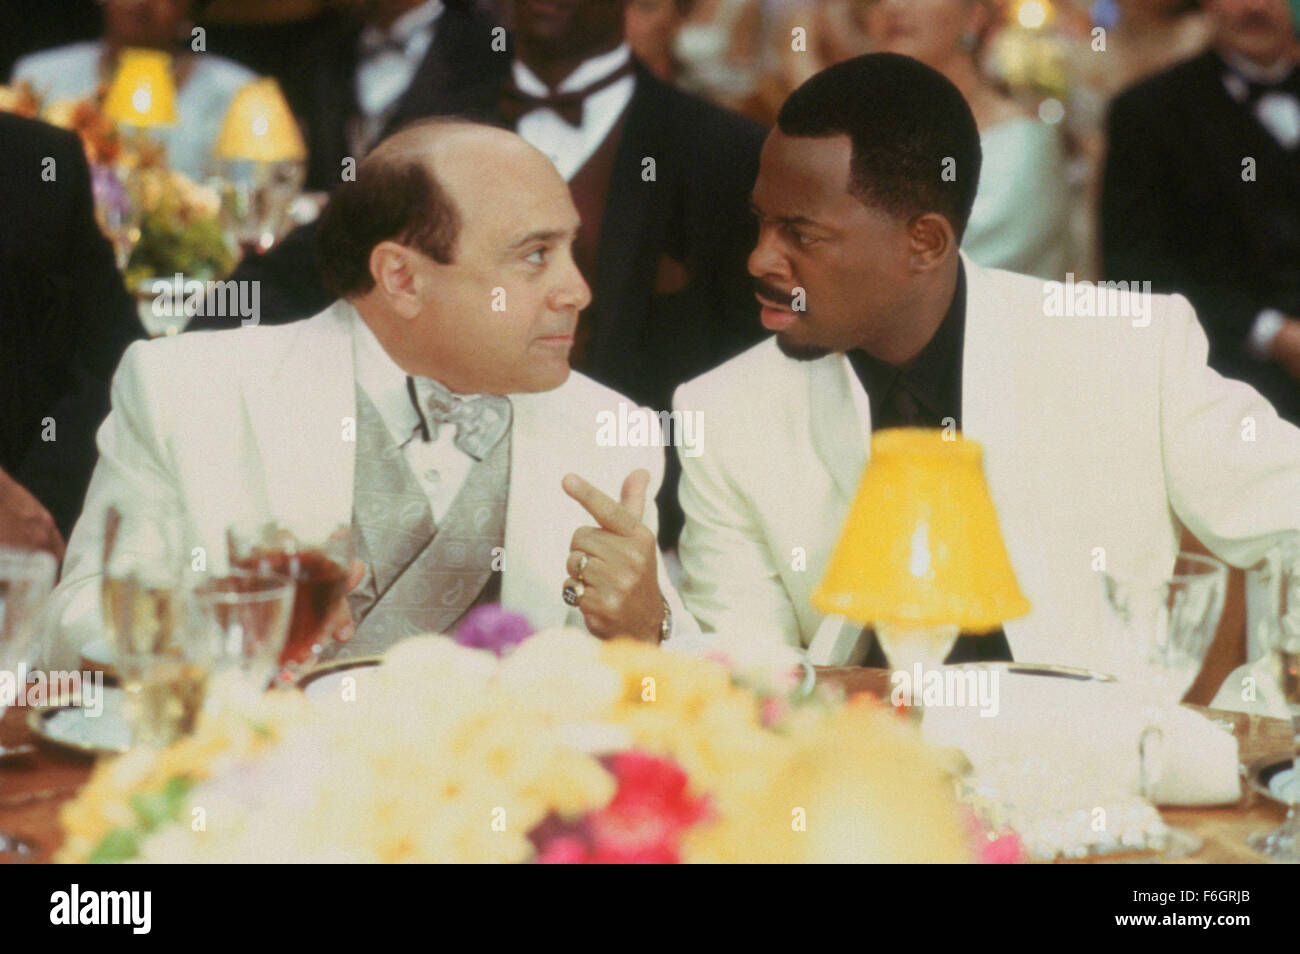 Jun 01, 2001; Boston , MA, USA; Actors MARTIN LAWRENCE as Kevin Caffrey and  DANNY DEVITO as Max Fairbanks star in 'What's The Worst That Could Happen?' Stock Photo